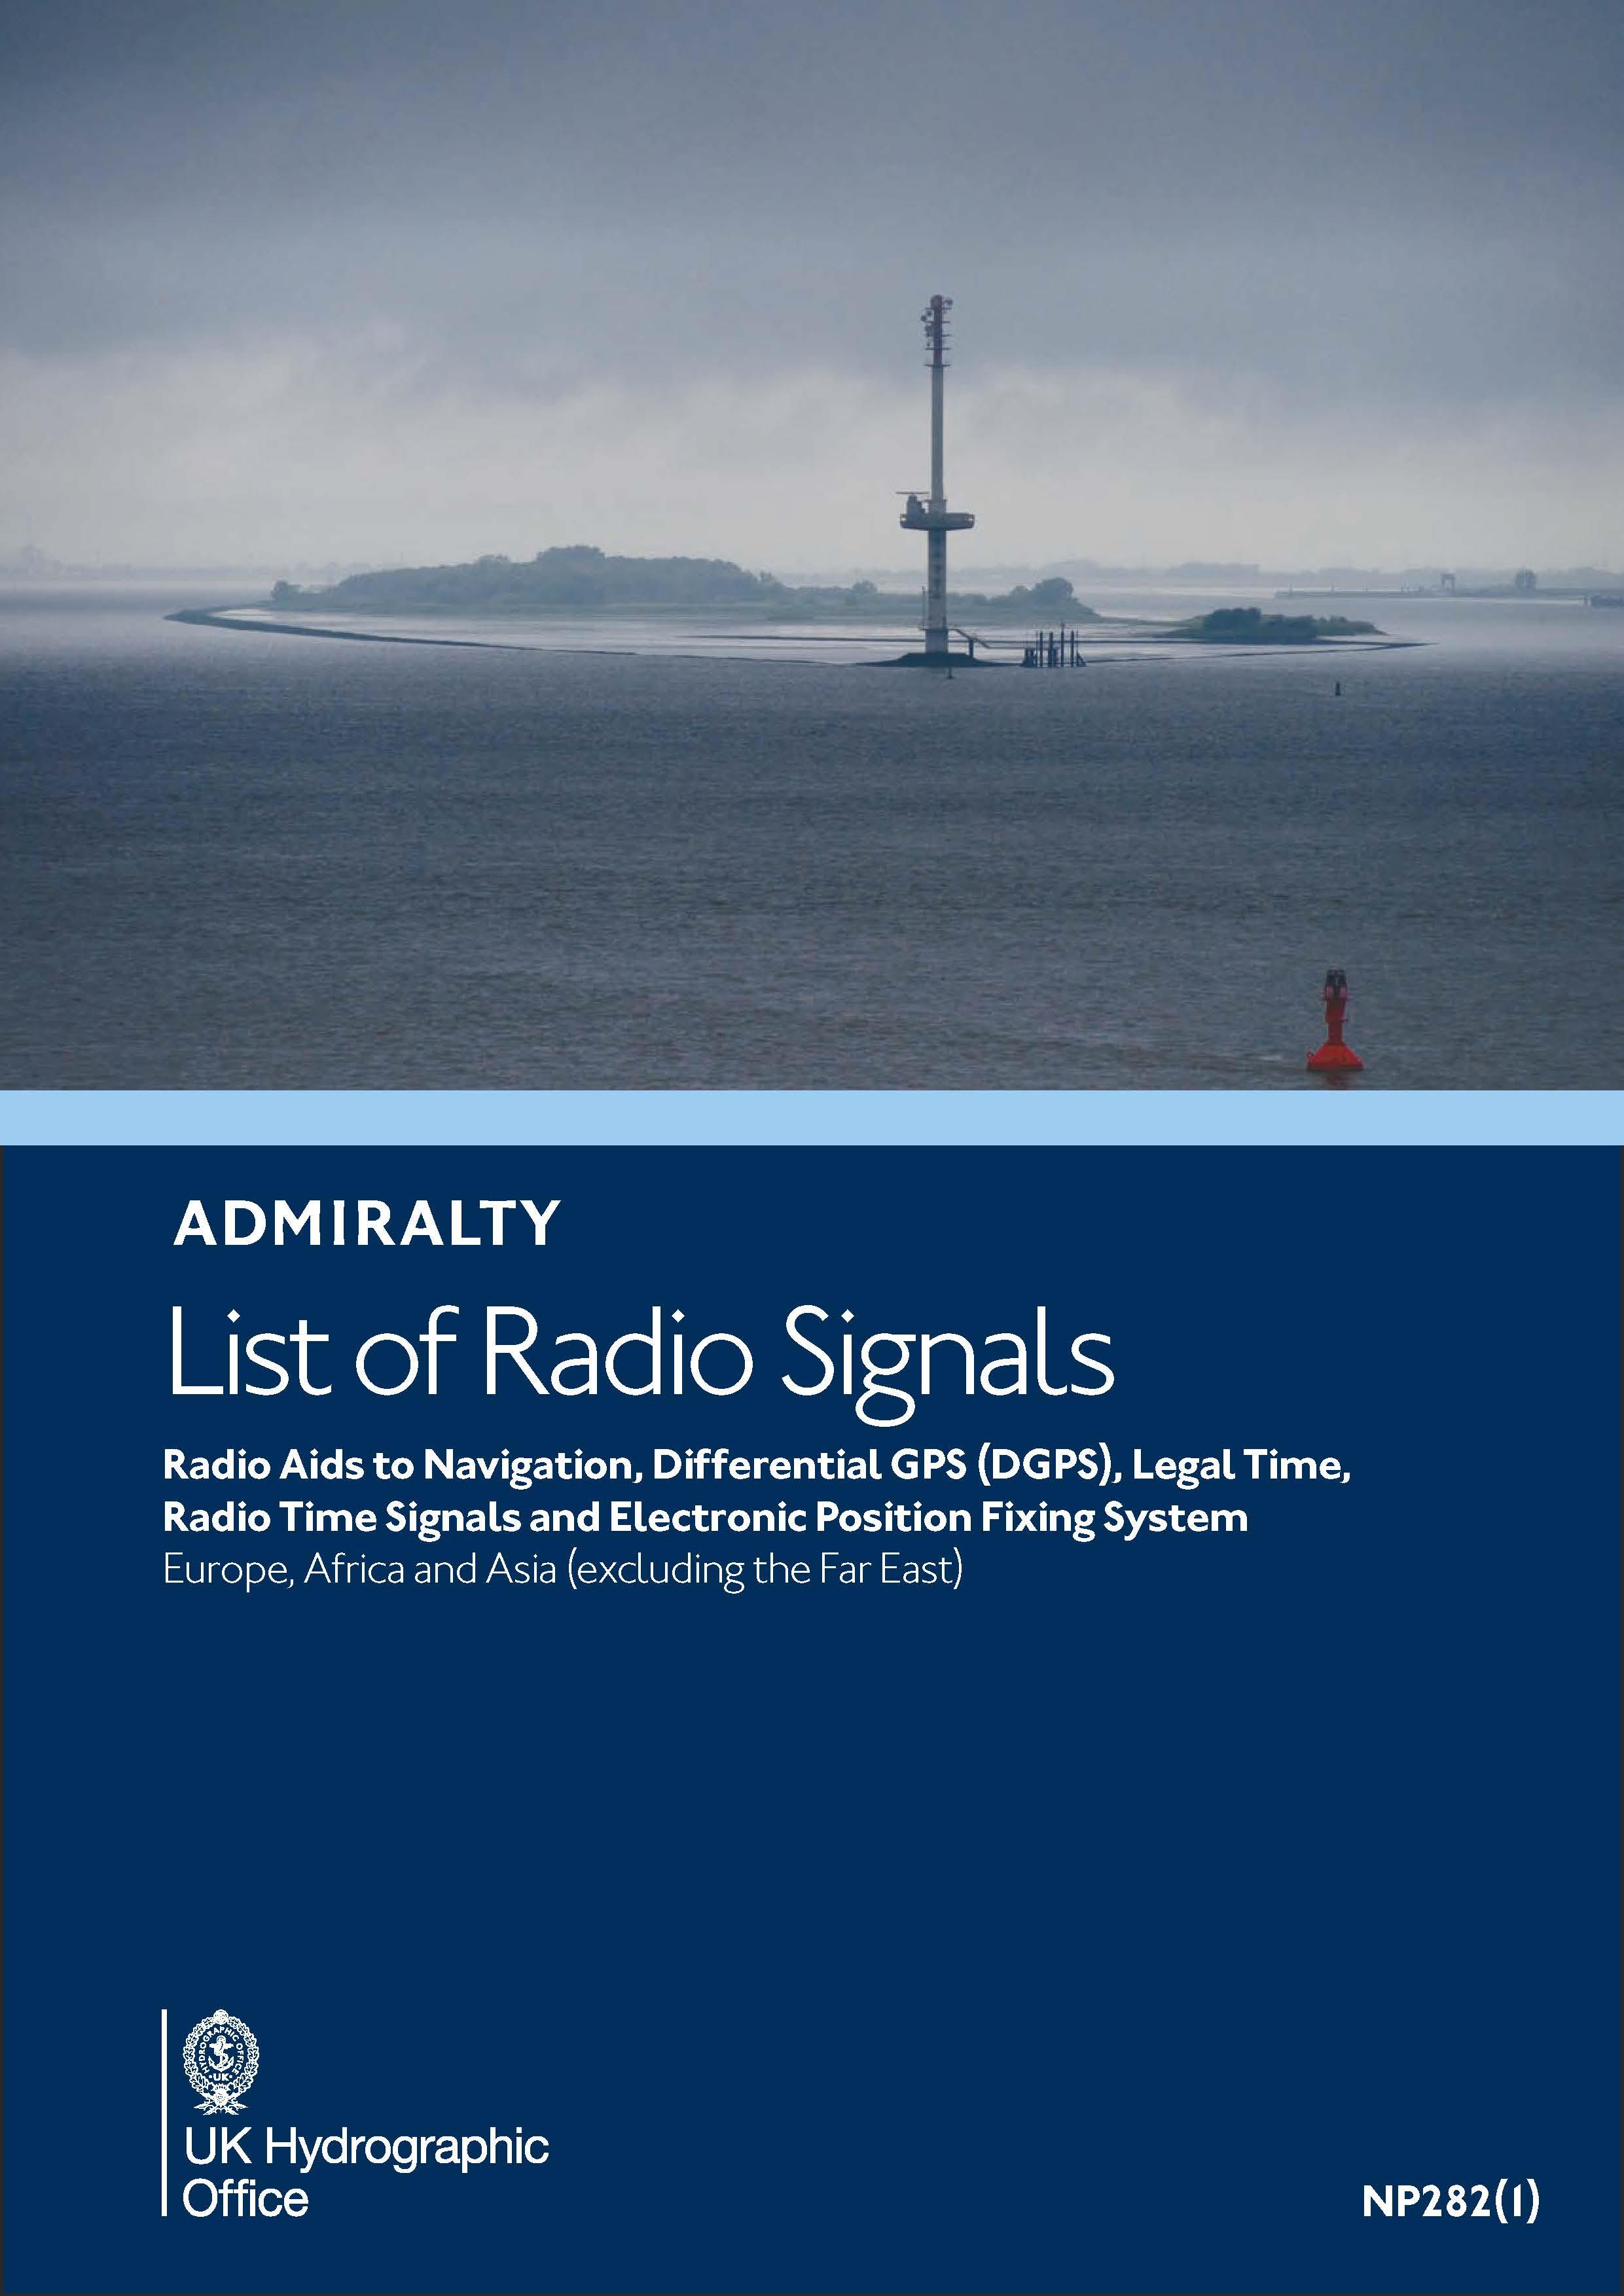 ADMIRALTY NP282(1) RadioSignals Position Fixing Systems & Time Signals - EMEA